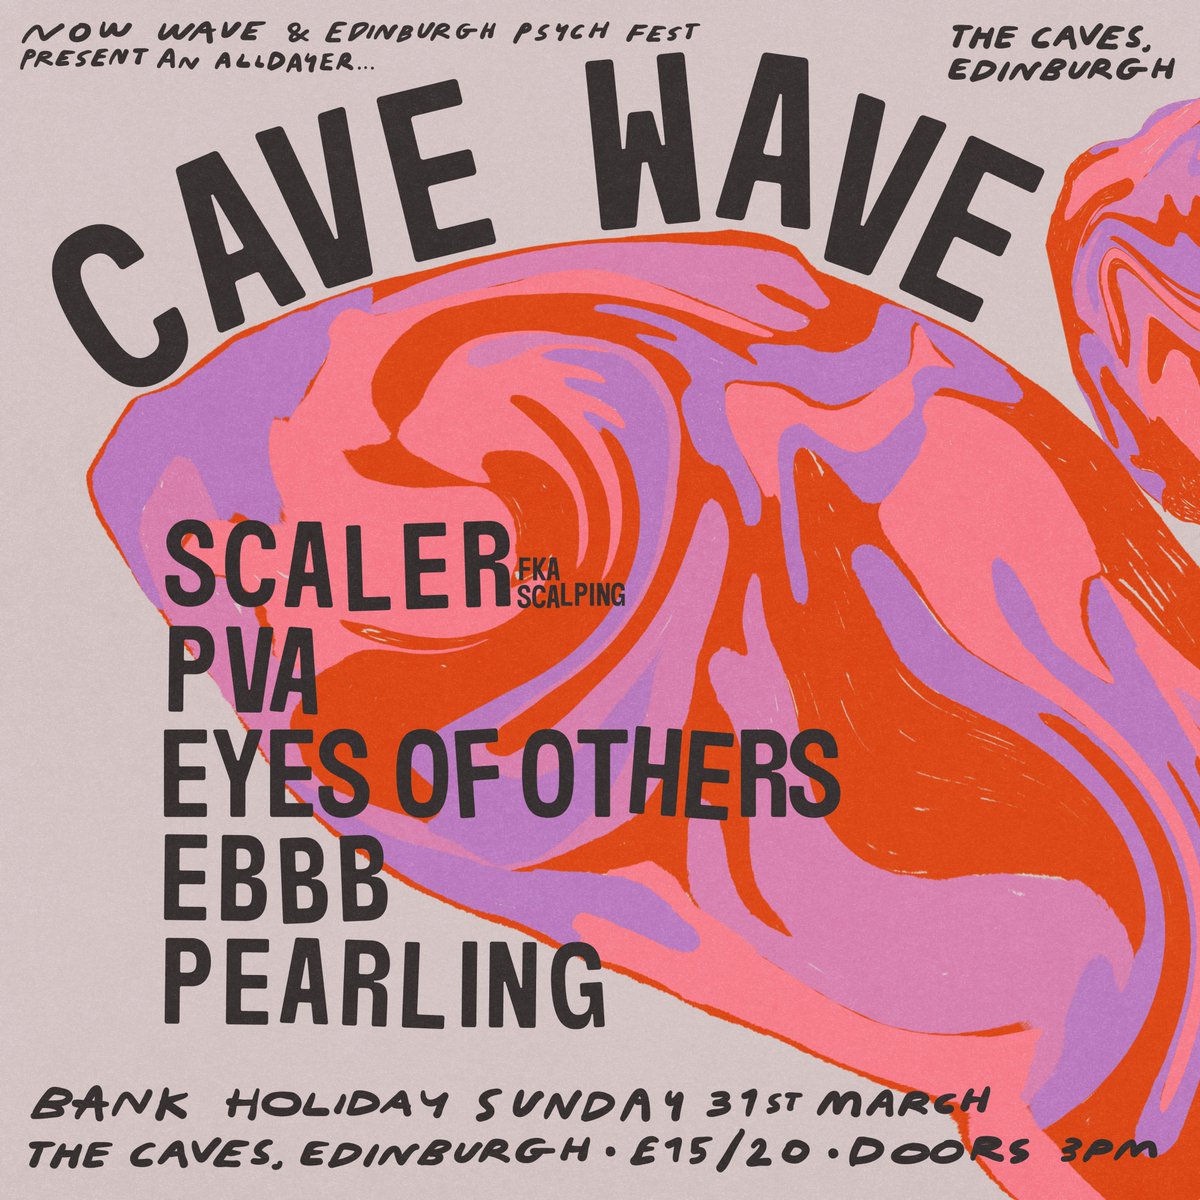 Last chance for your Cave Wave early bird tickets! tinyurl.com/CAVEWAVE24